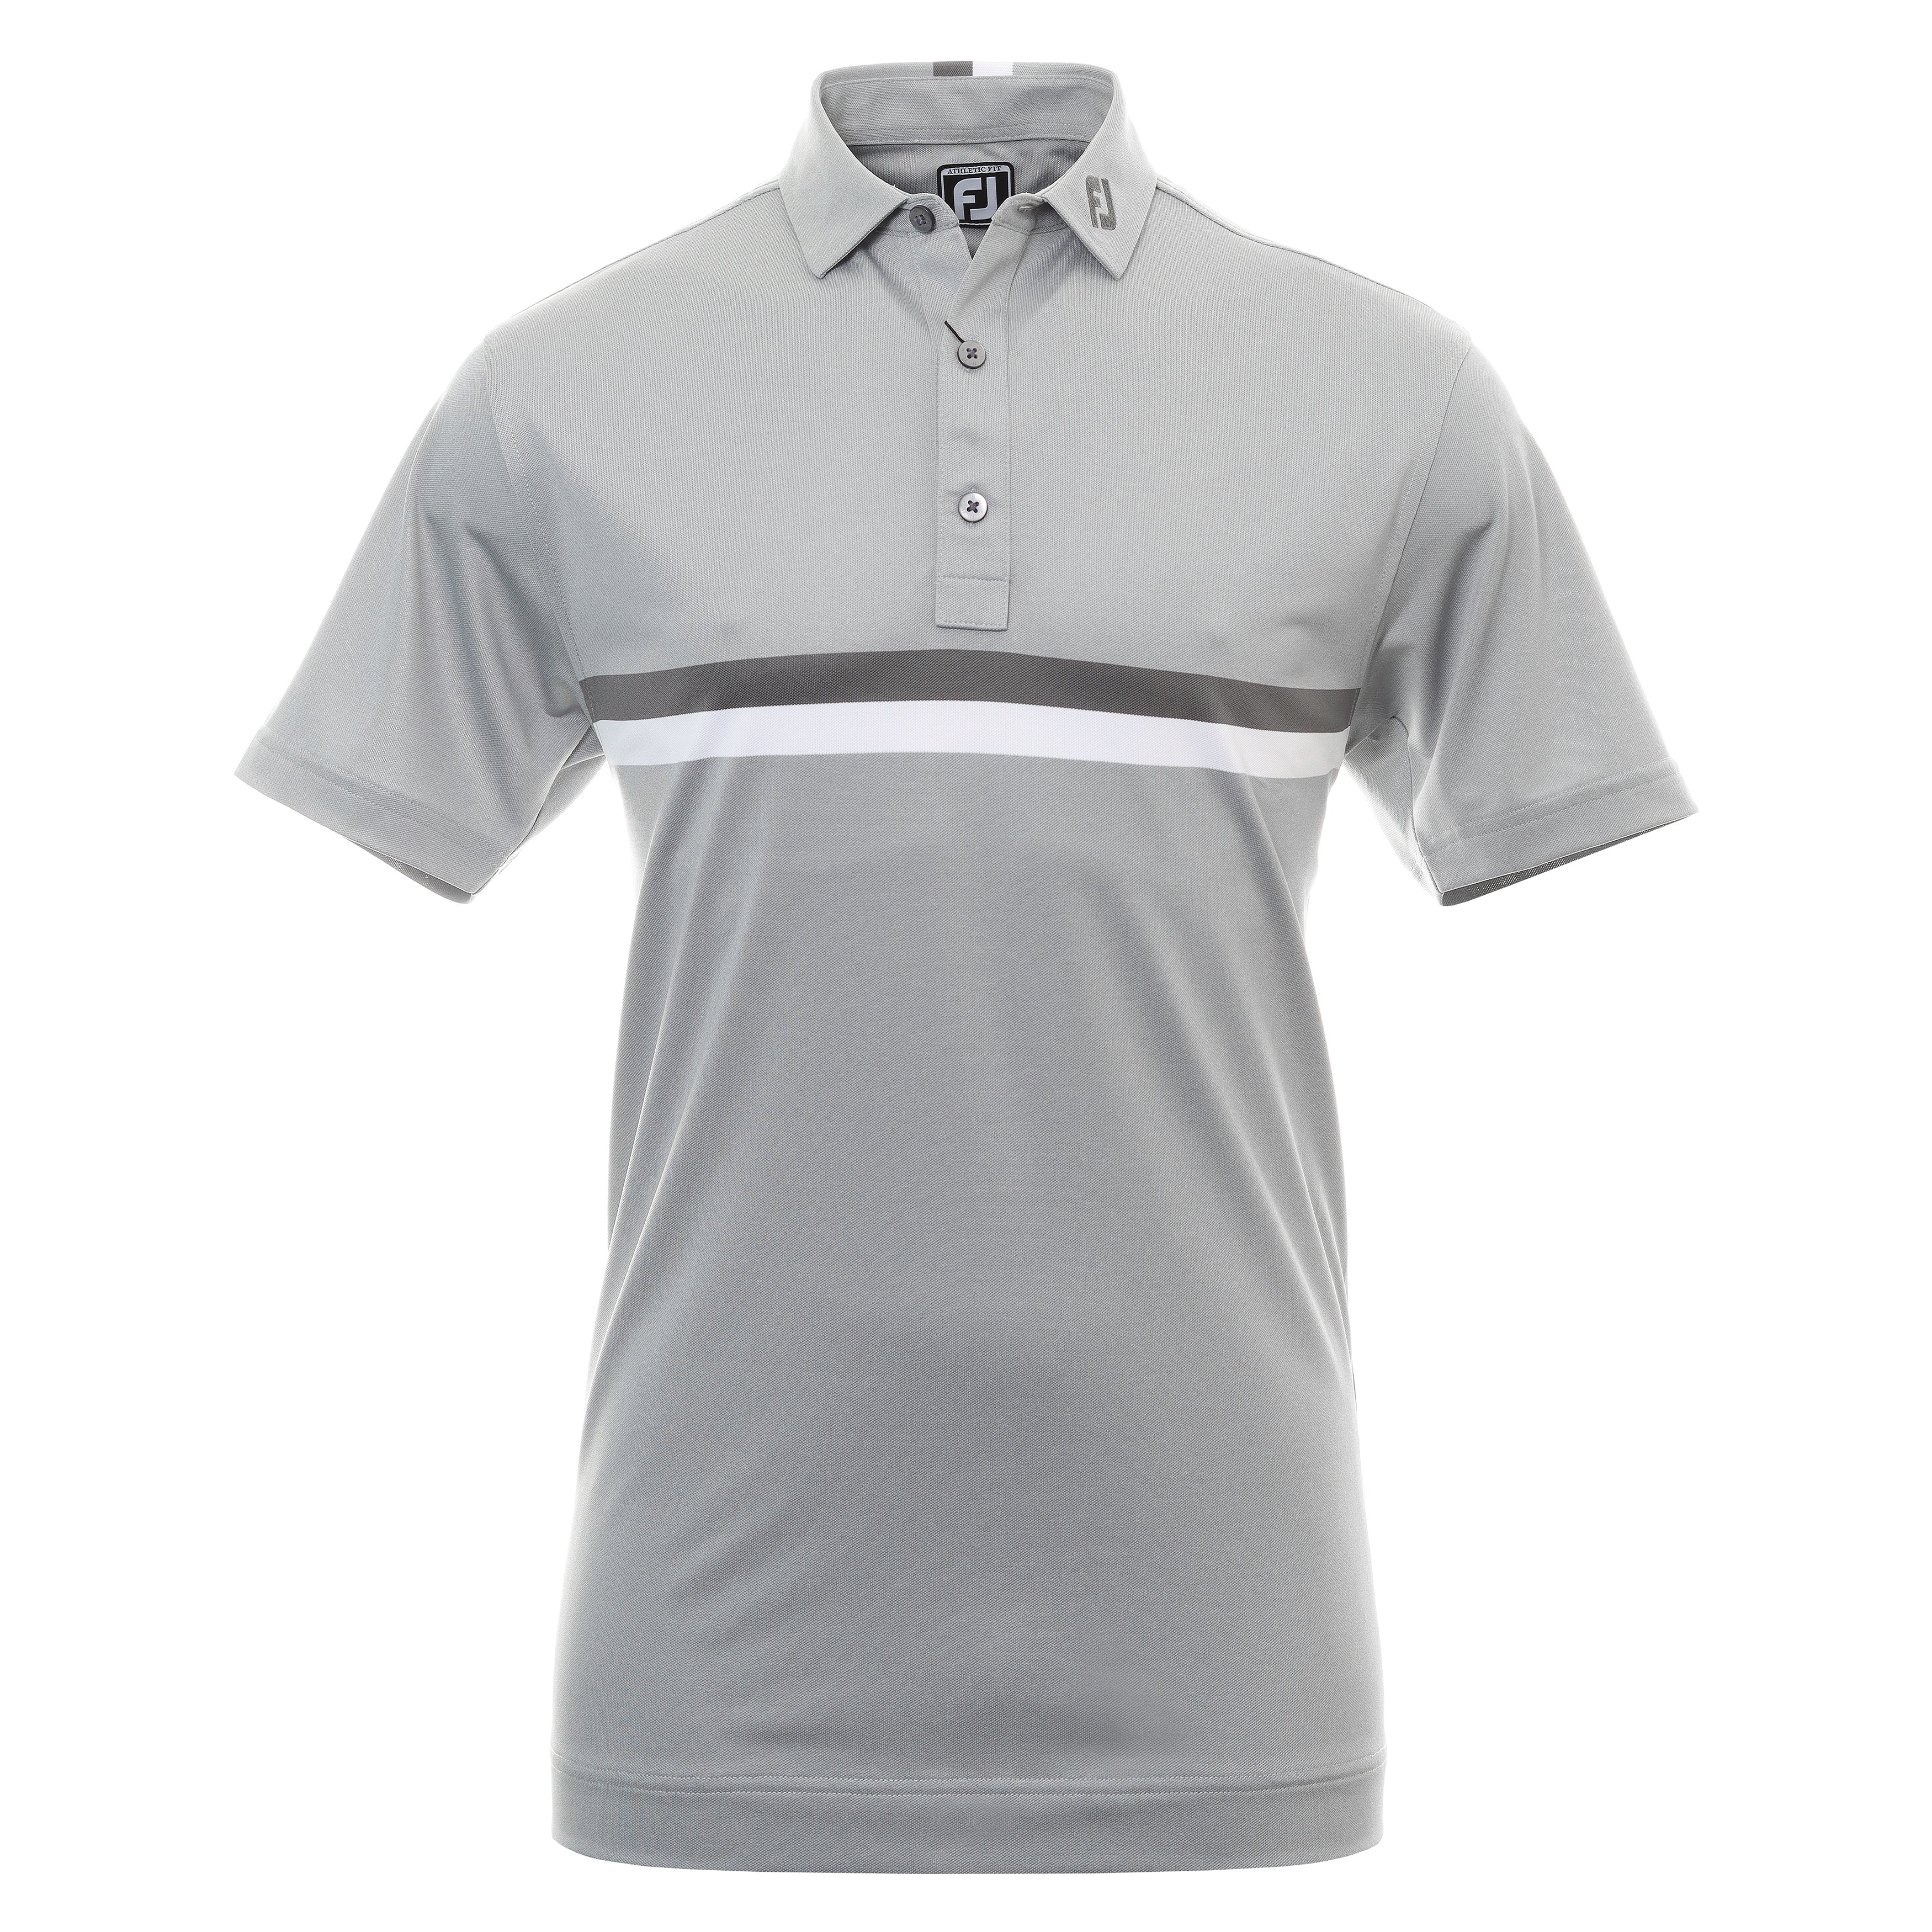 FootJoy Double Chest Band Pique Golf Shirt 88442 Heather Grey Charcoal ...